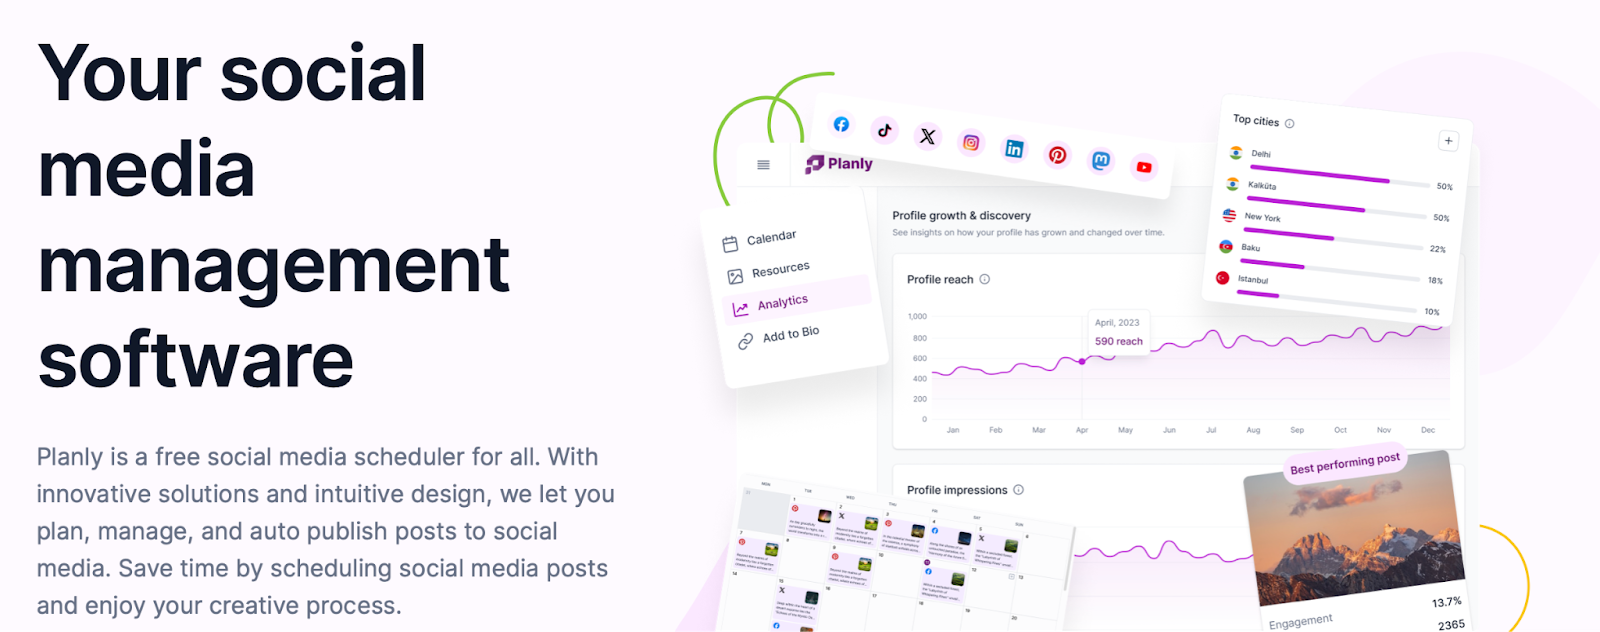 Planly enables you to easily plan, manage, and auto-publish your social posts.